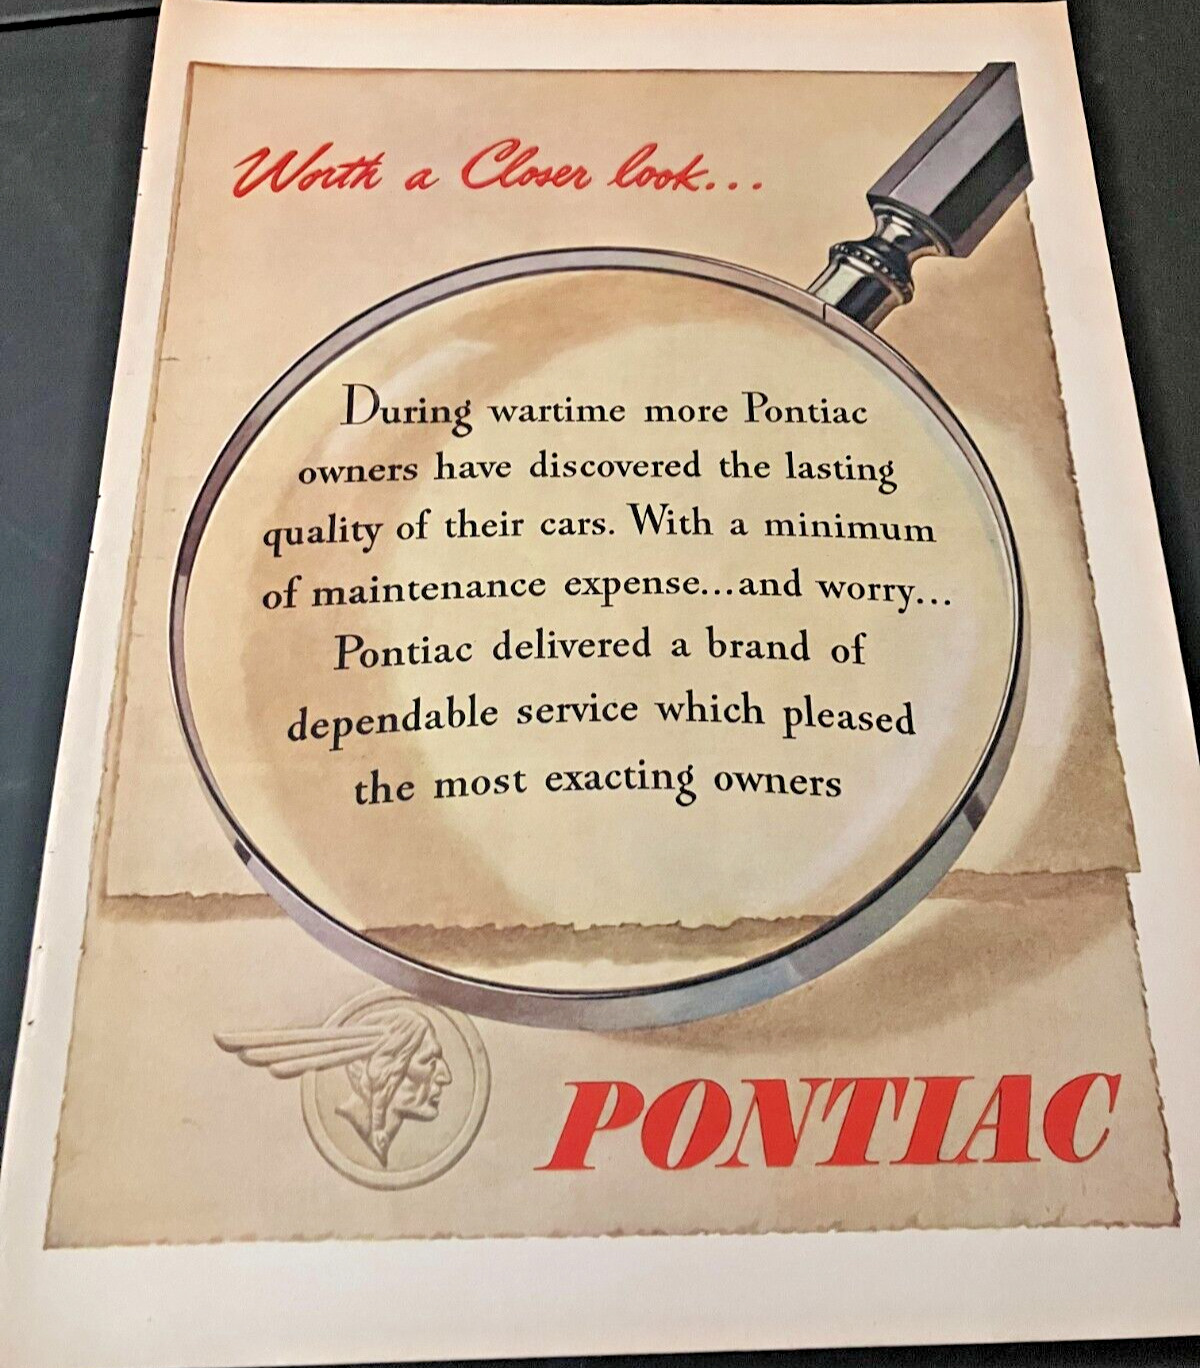 1945 Pontiac During World War 2 - Vintage Print Ad / Wall Art - GREAT CONDITION